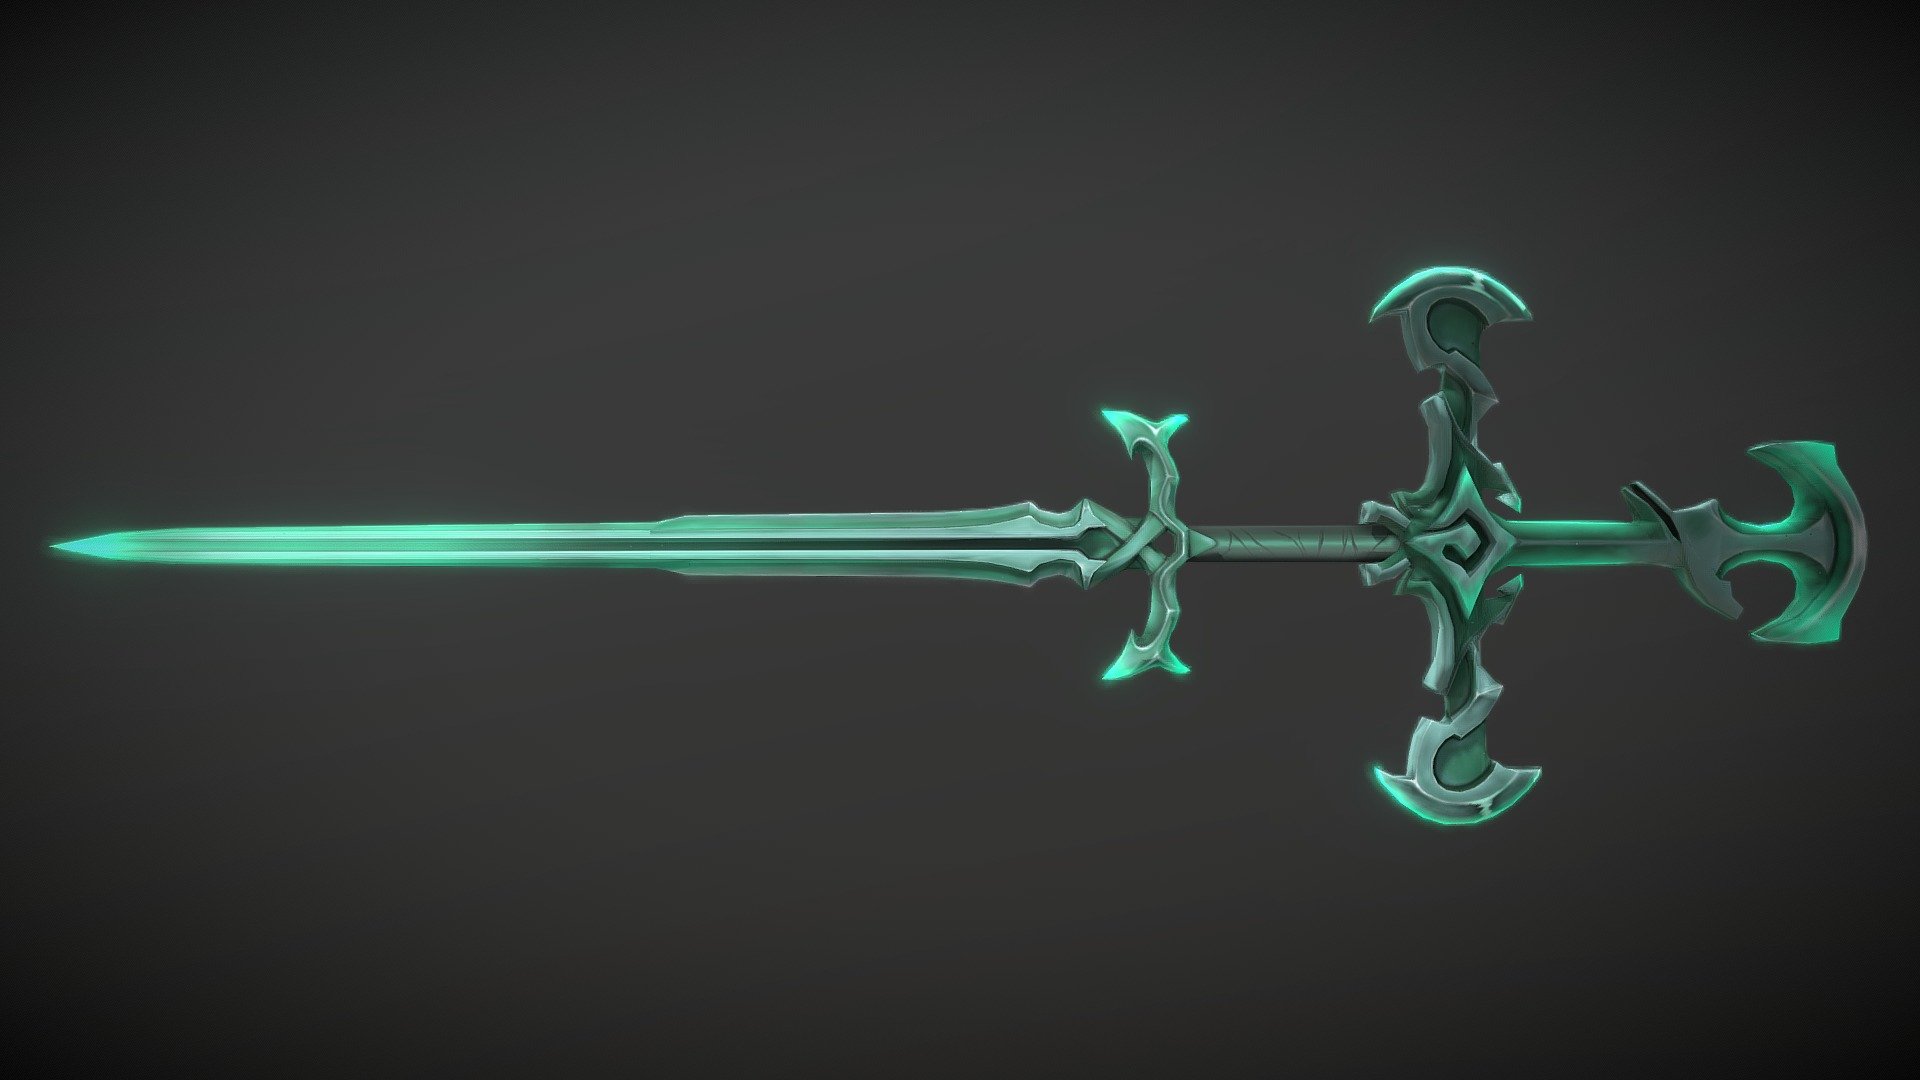 Viego sword from League of Legends.
um&hellip; nice zweihander&hellip; I think. so I made this fanart - Blade of the Ruined King Handpainted - 3D model by AX-7YK 3d model